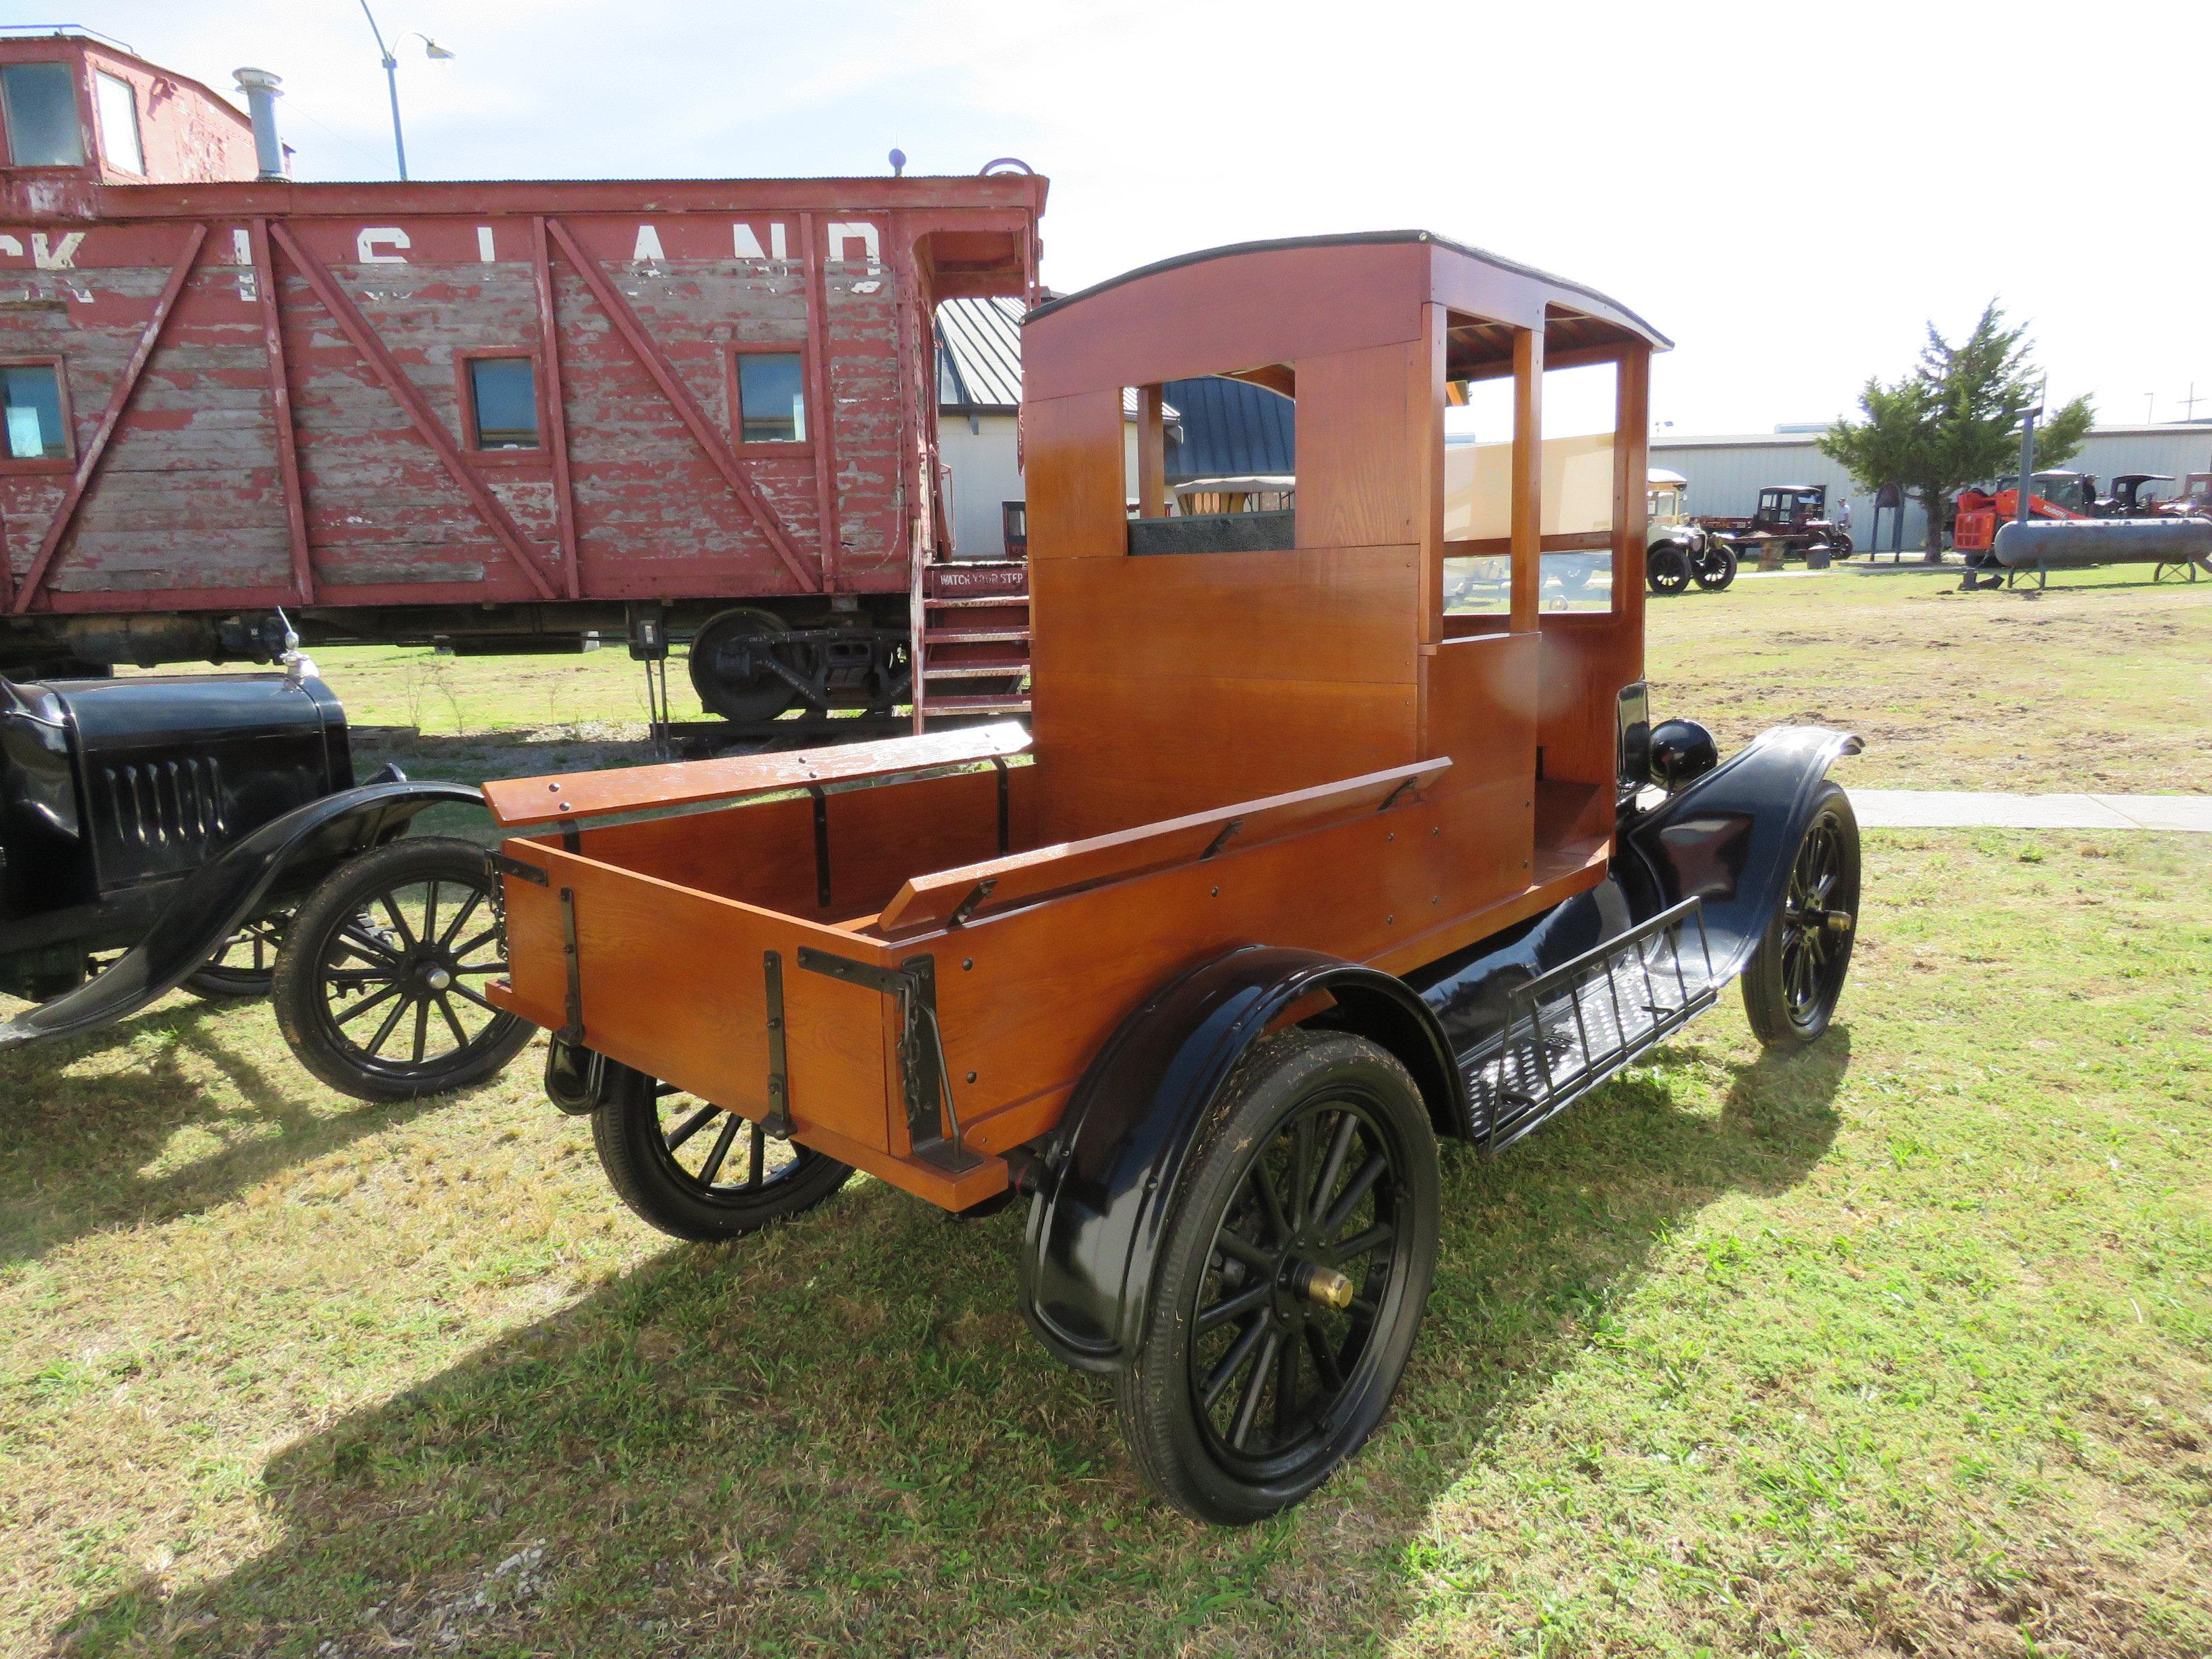 1923 Ford Model T Truck with Body